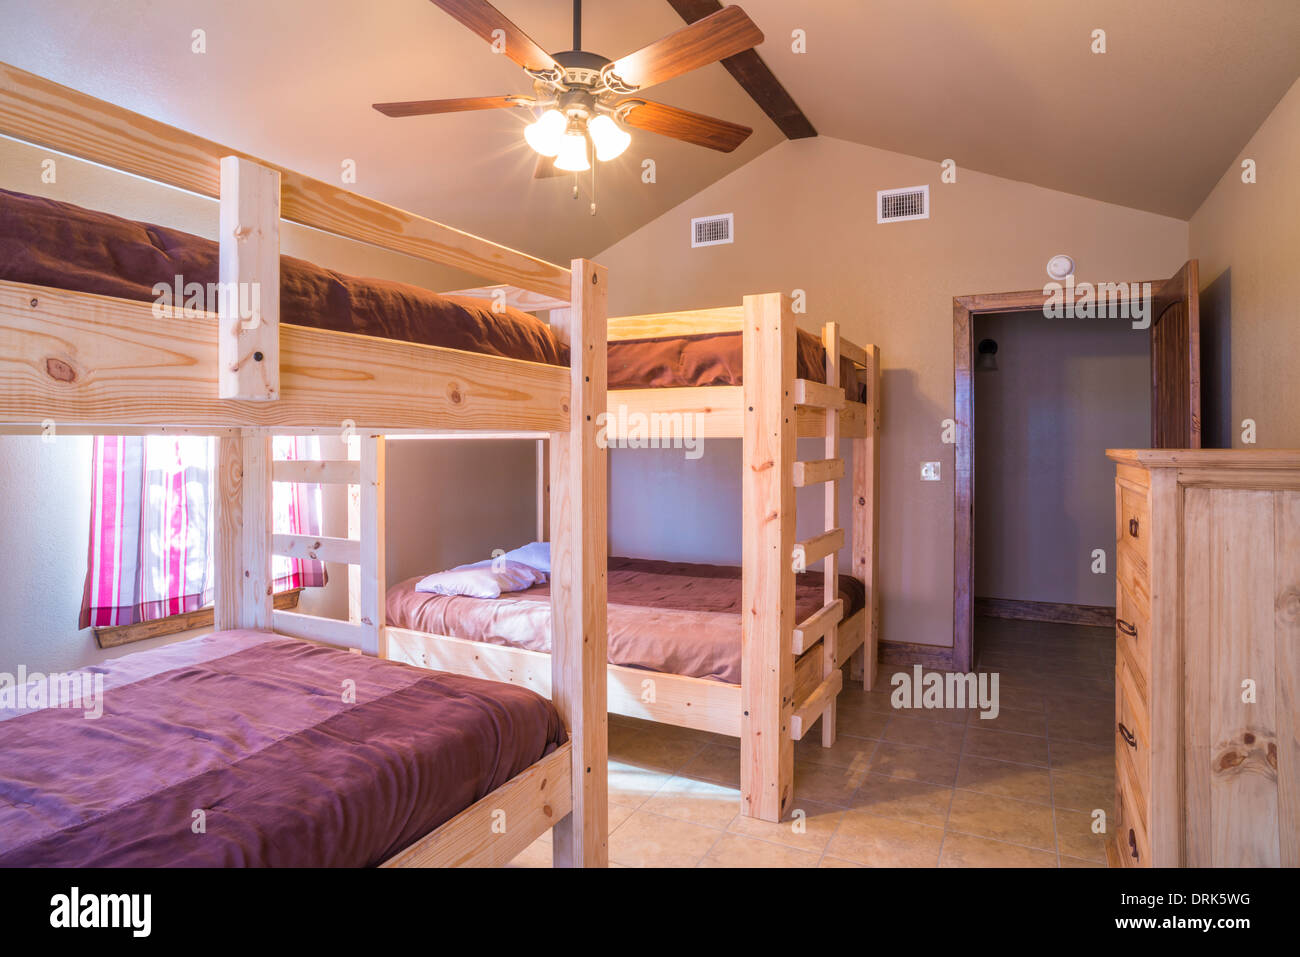 Usa Texas Bedroom Interior With Double Bunk Beds Stock Photo